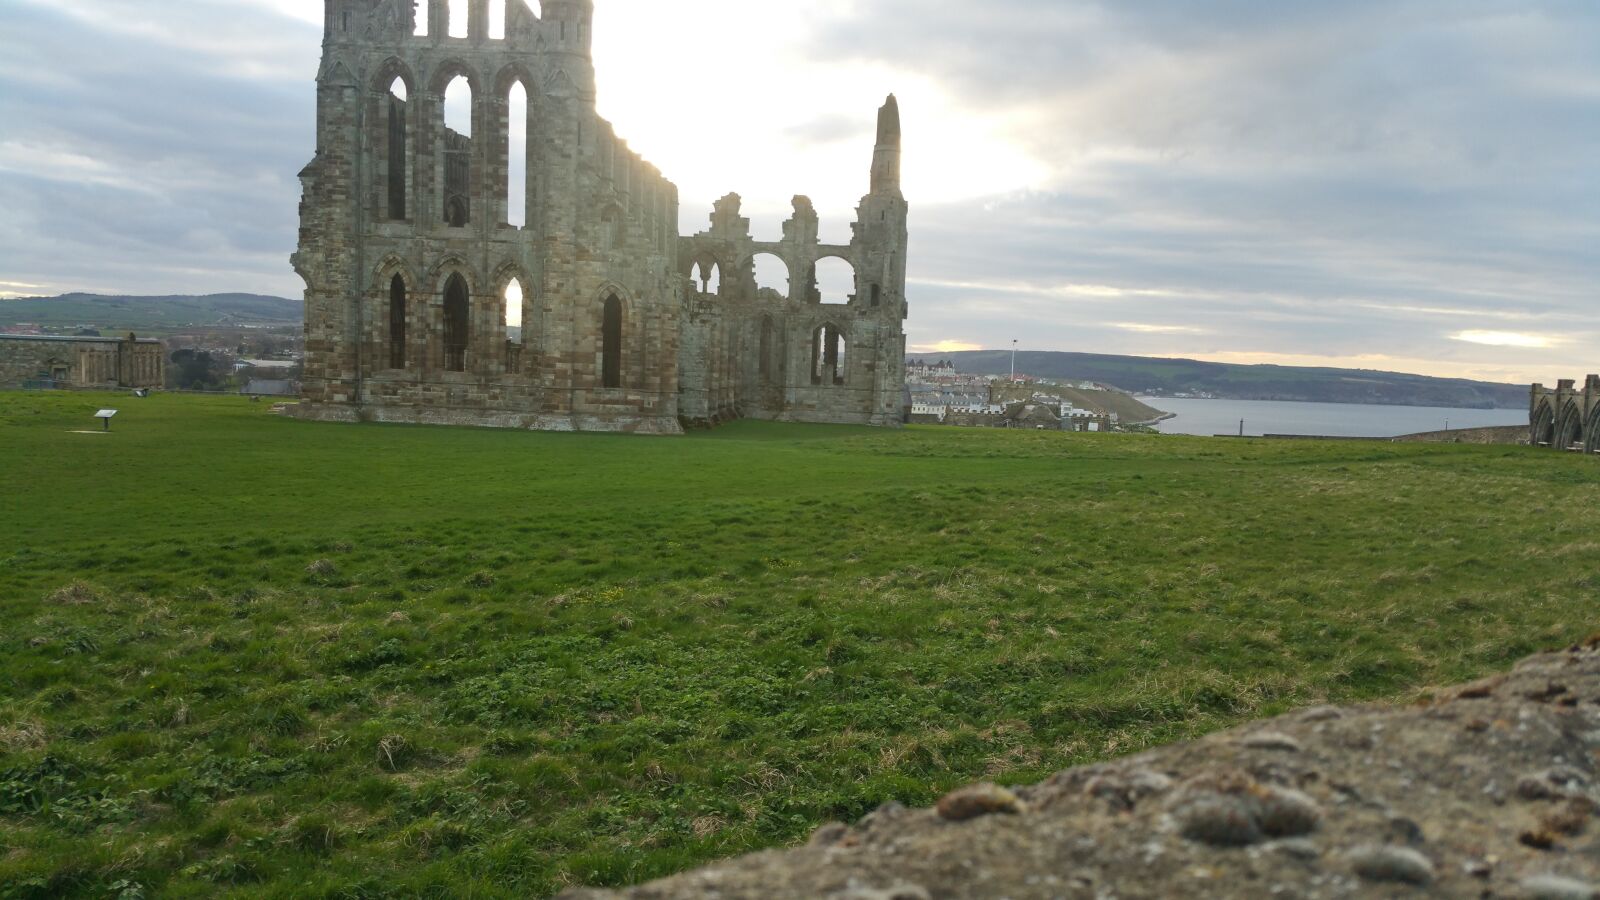 Samsung Galaxy Note Edge sample photo. Castle, whitby abbey, beautiful photography